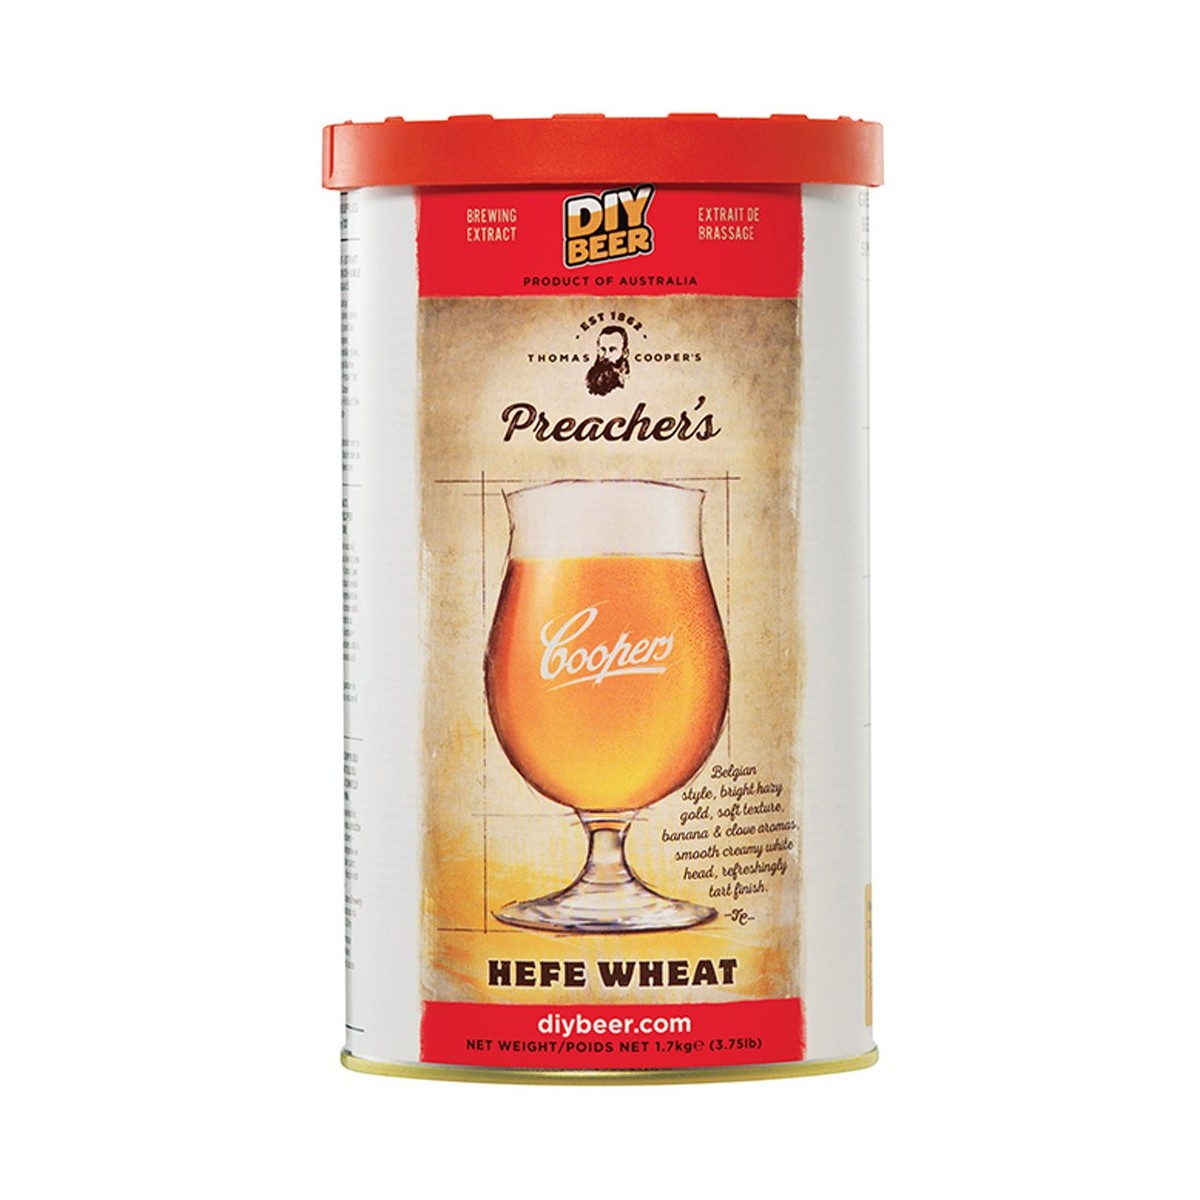 Alaus gamybos rinkinys Coopers Preachers Hefe Wheat 1,7 kg 23 ltr.